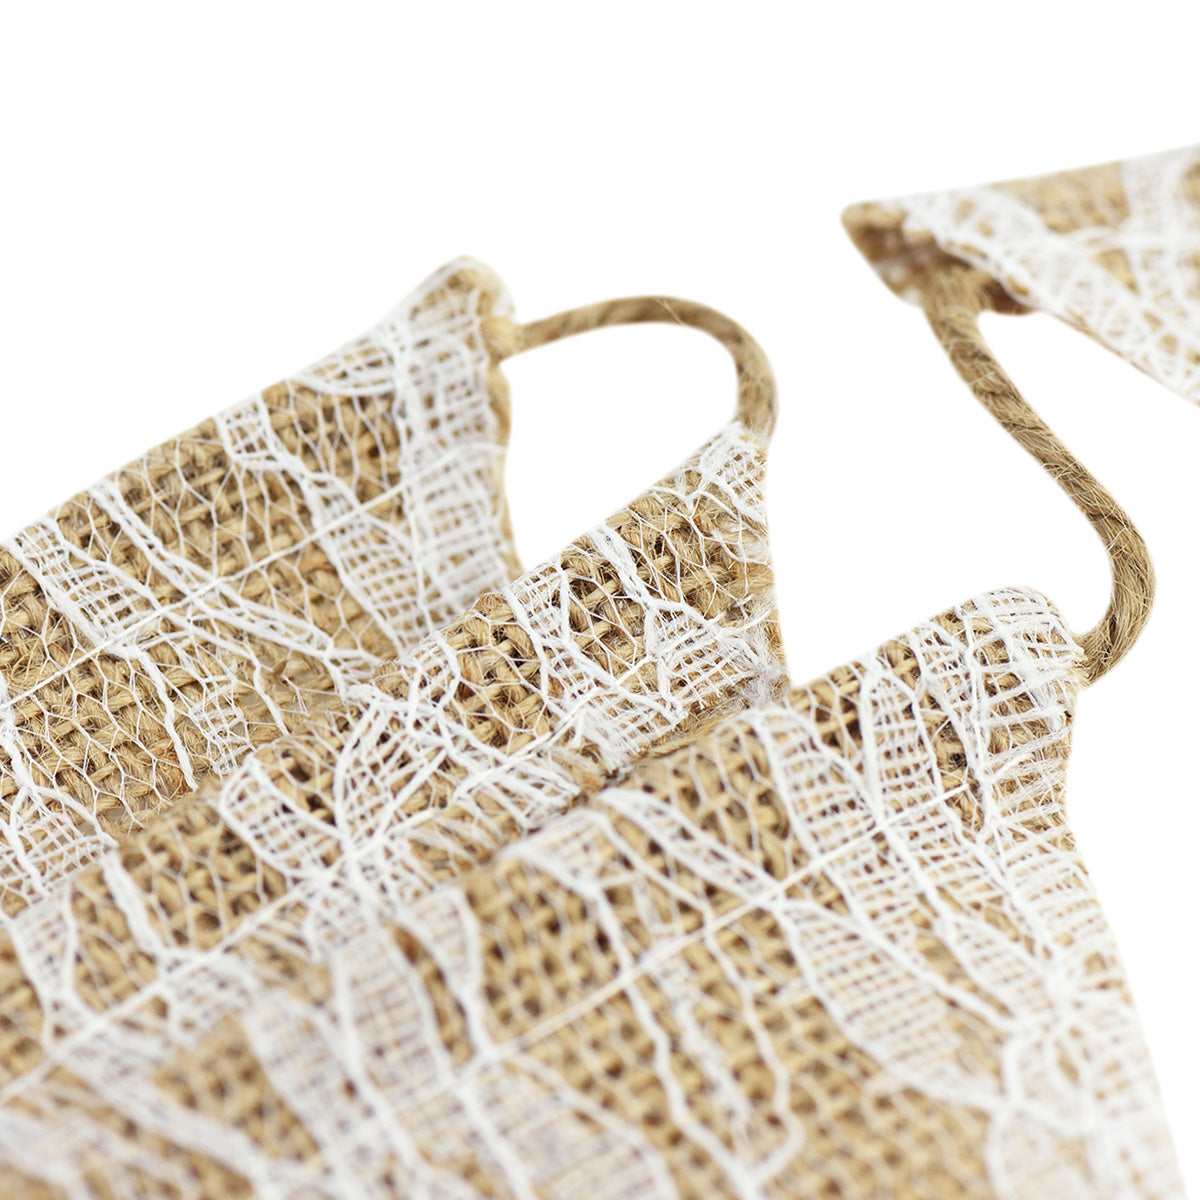 Burlap with Lace Pennant Banner